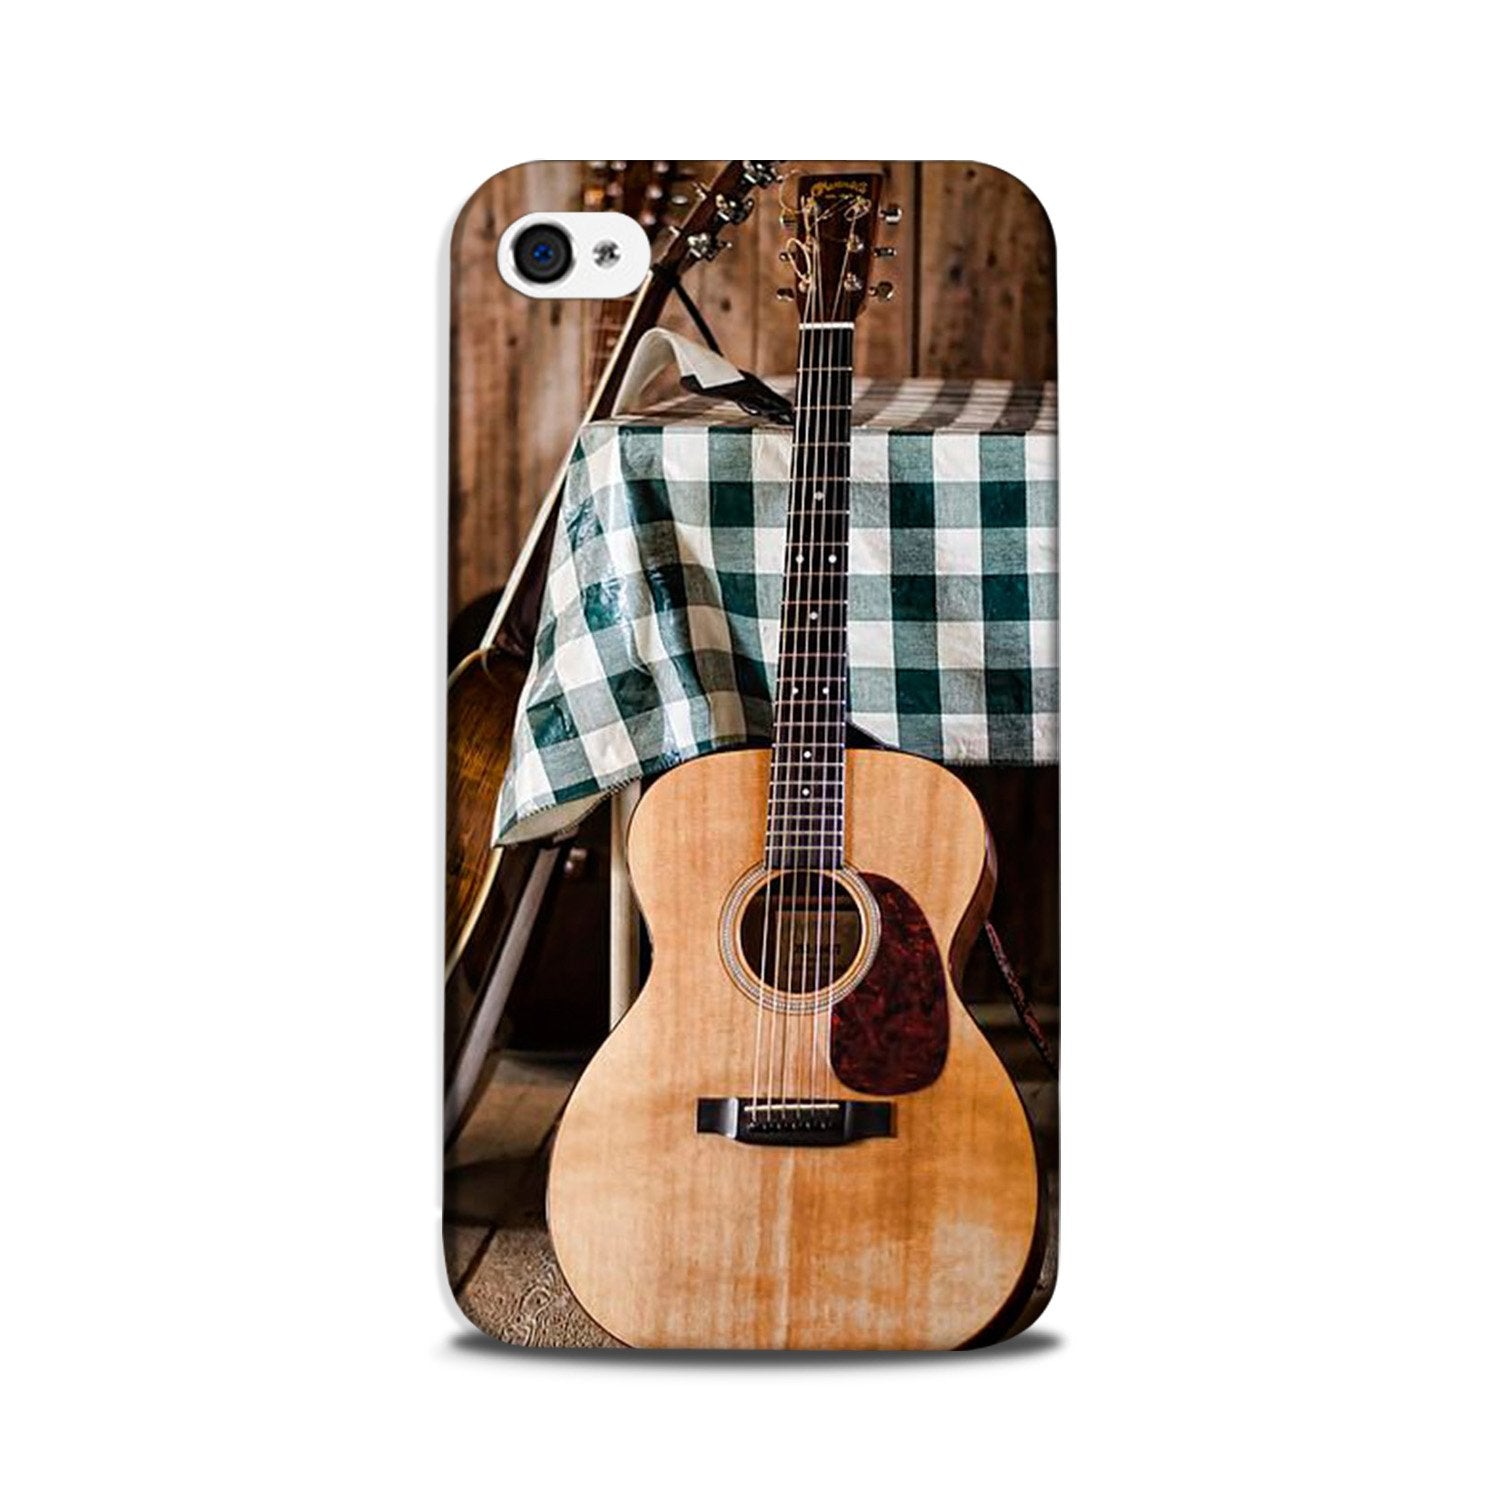 Guitar2 Case for iPhone 5/ 5s